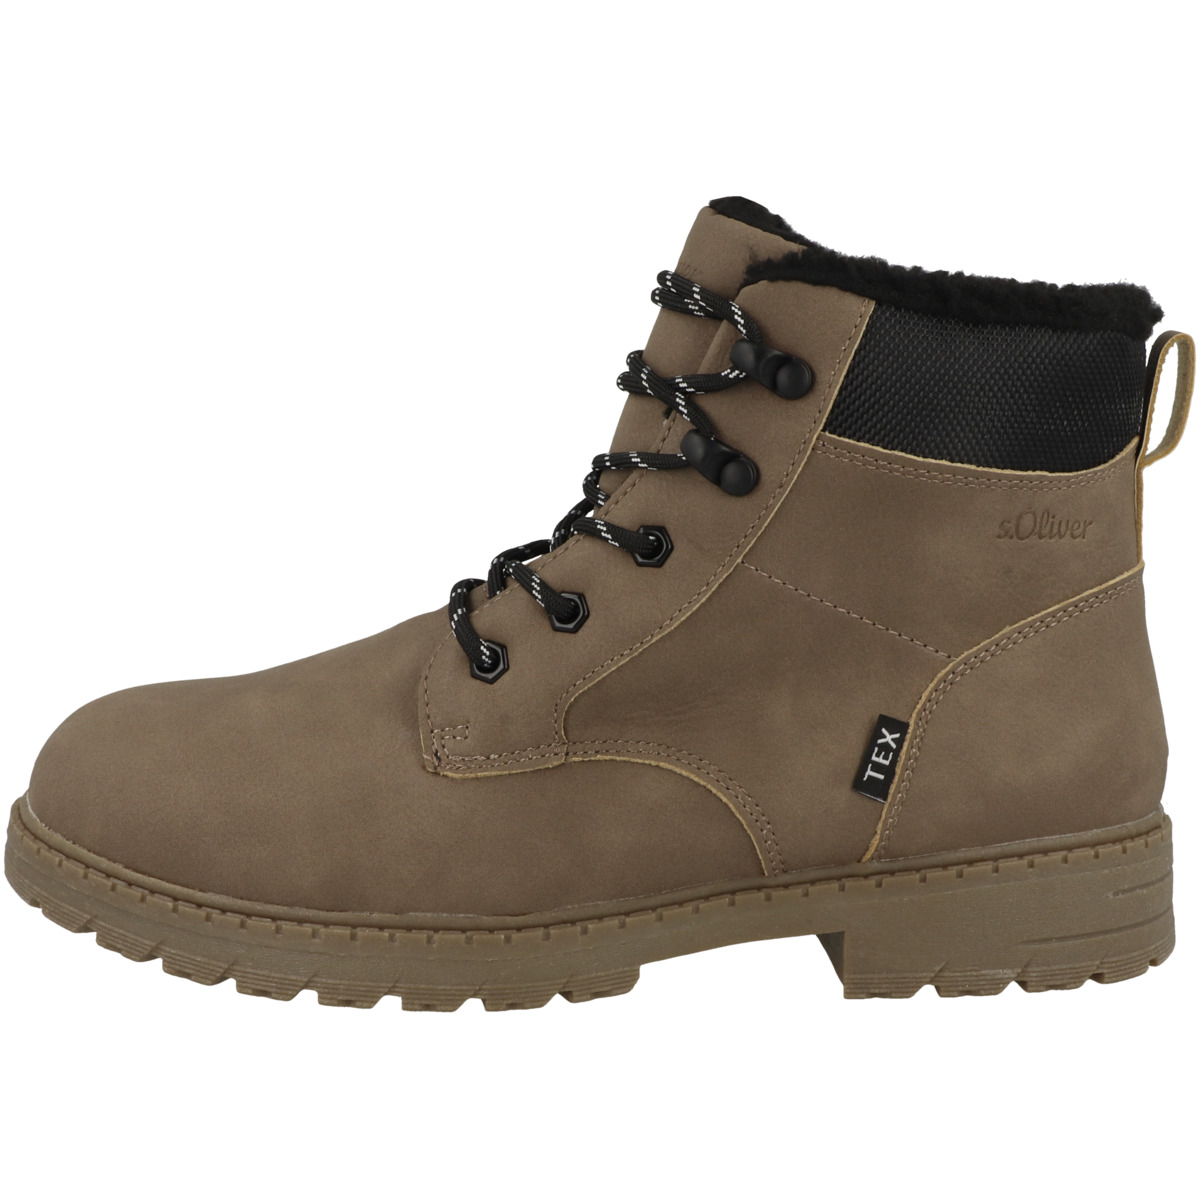 s.Oliver 5-46102-41 Boots grau